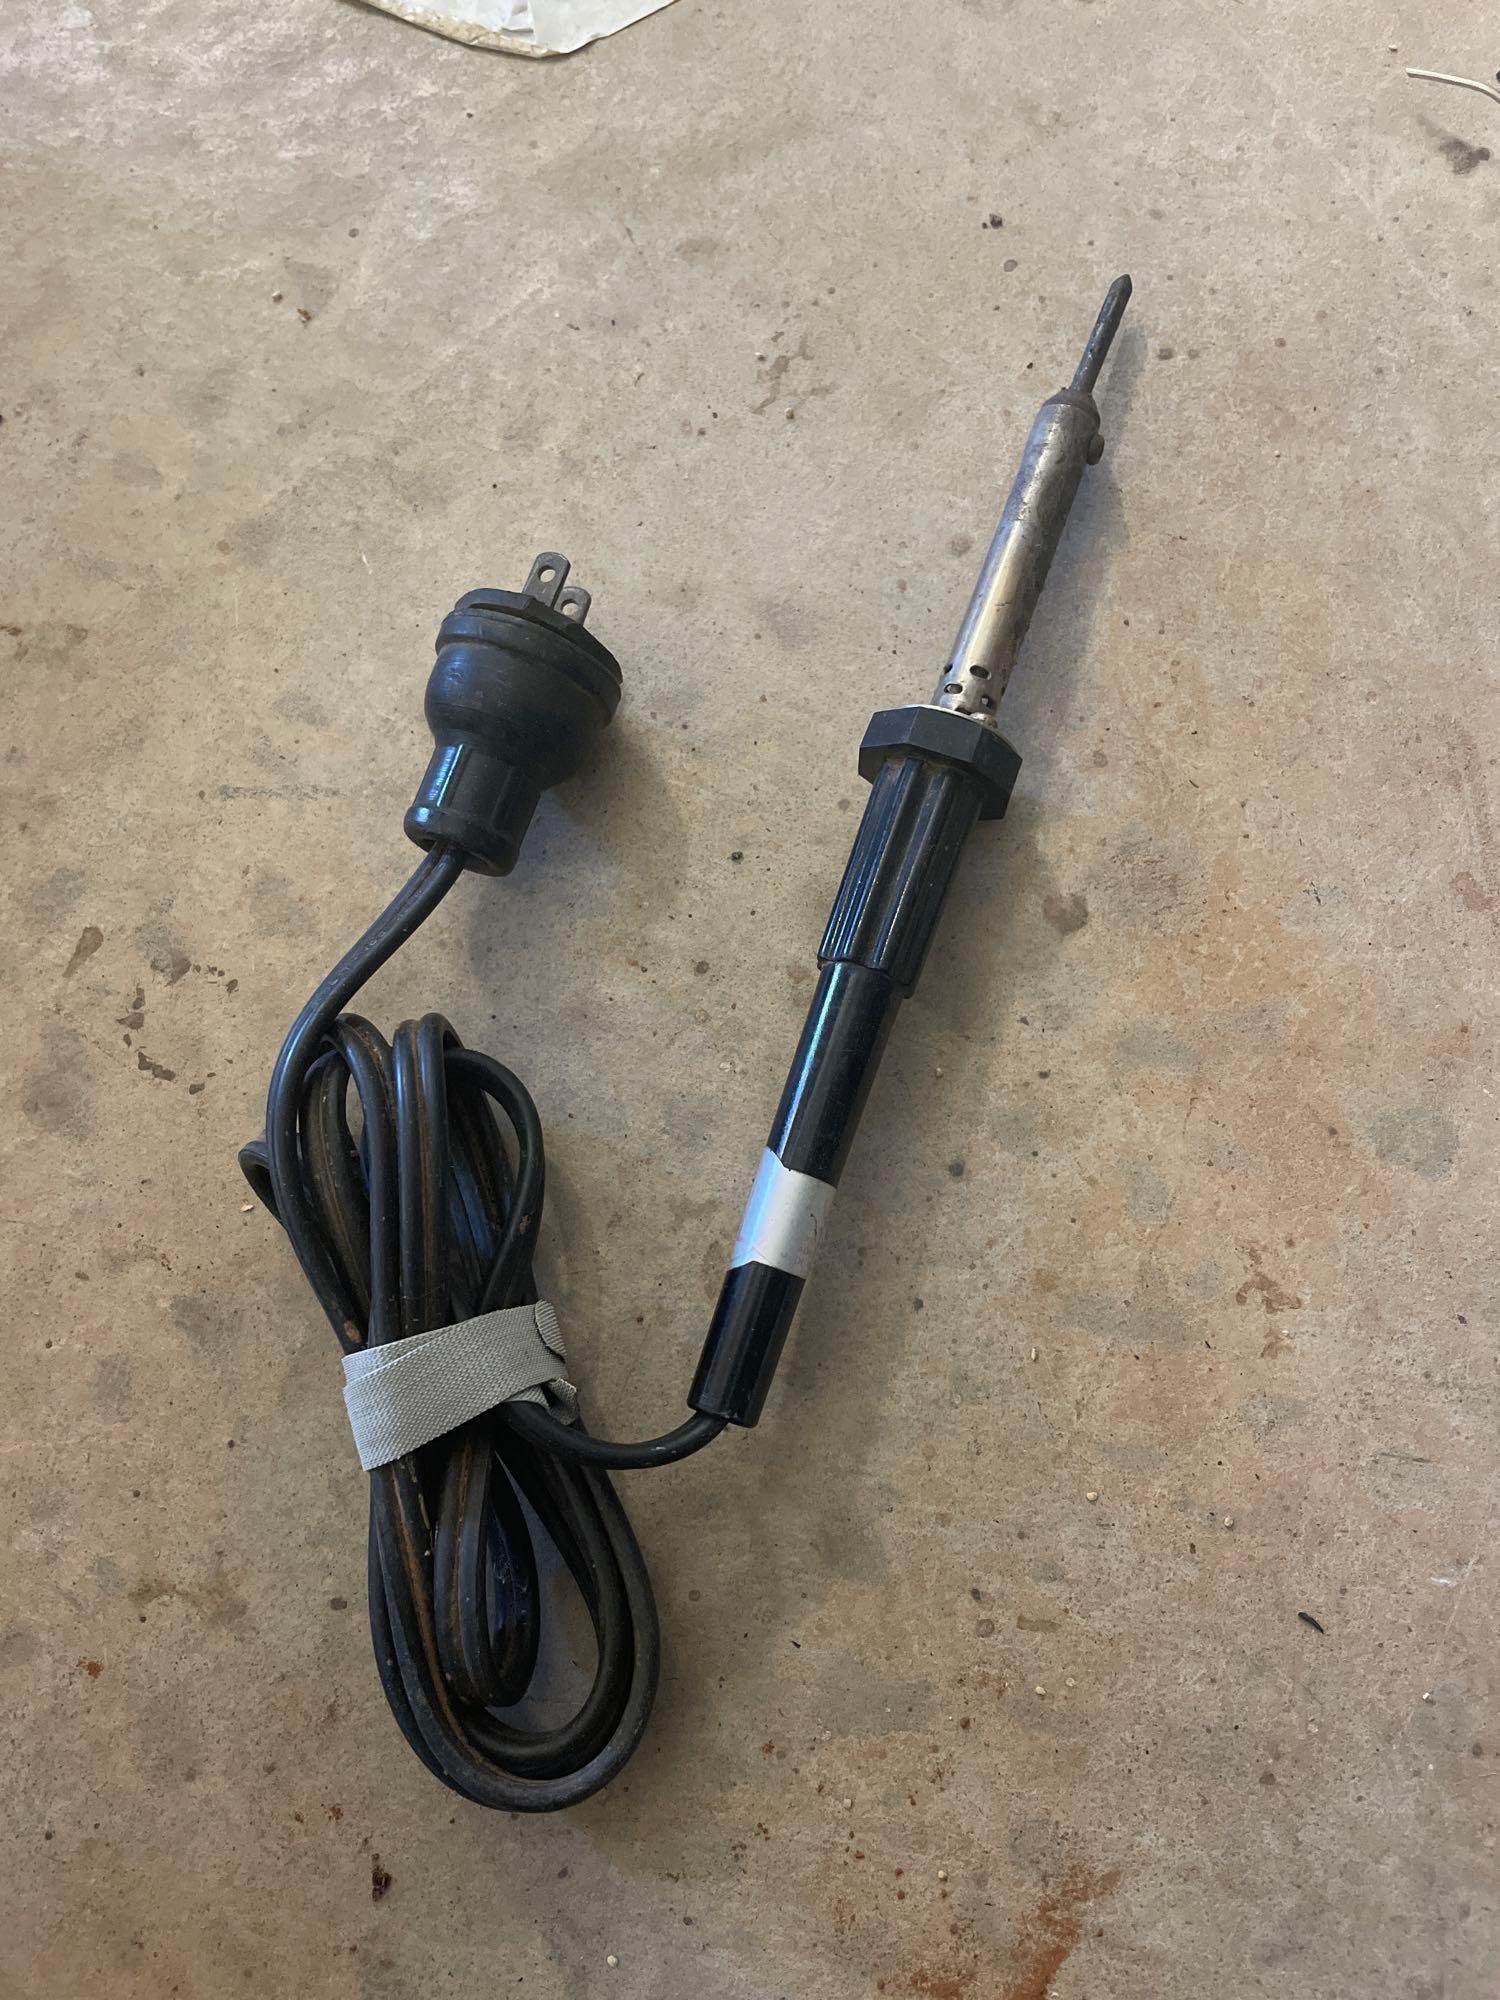 soldering items and welding rods